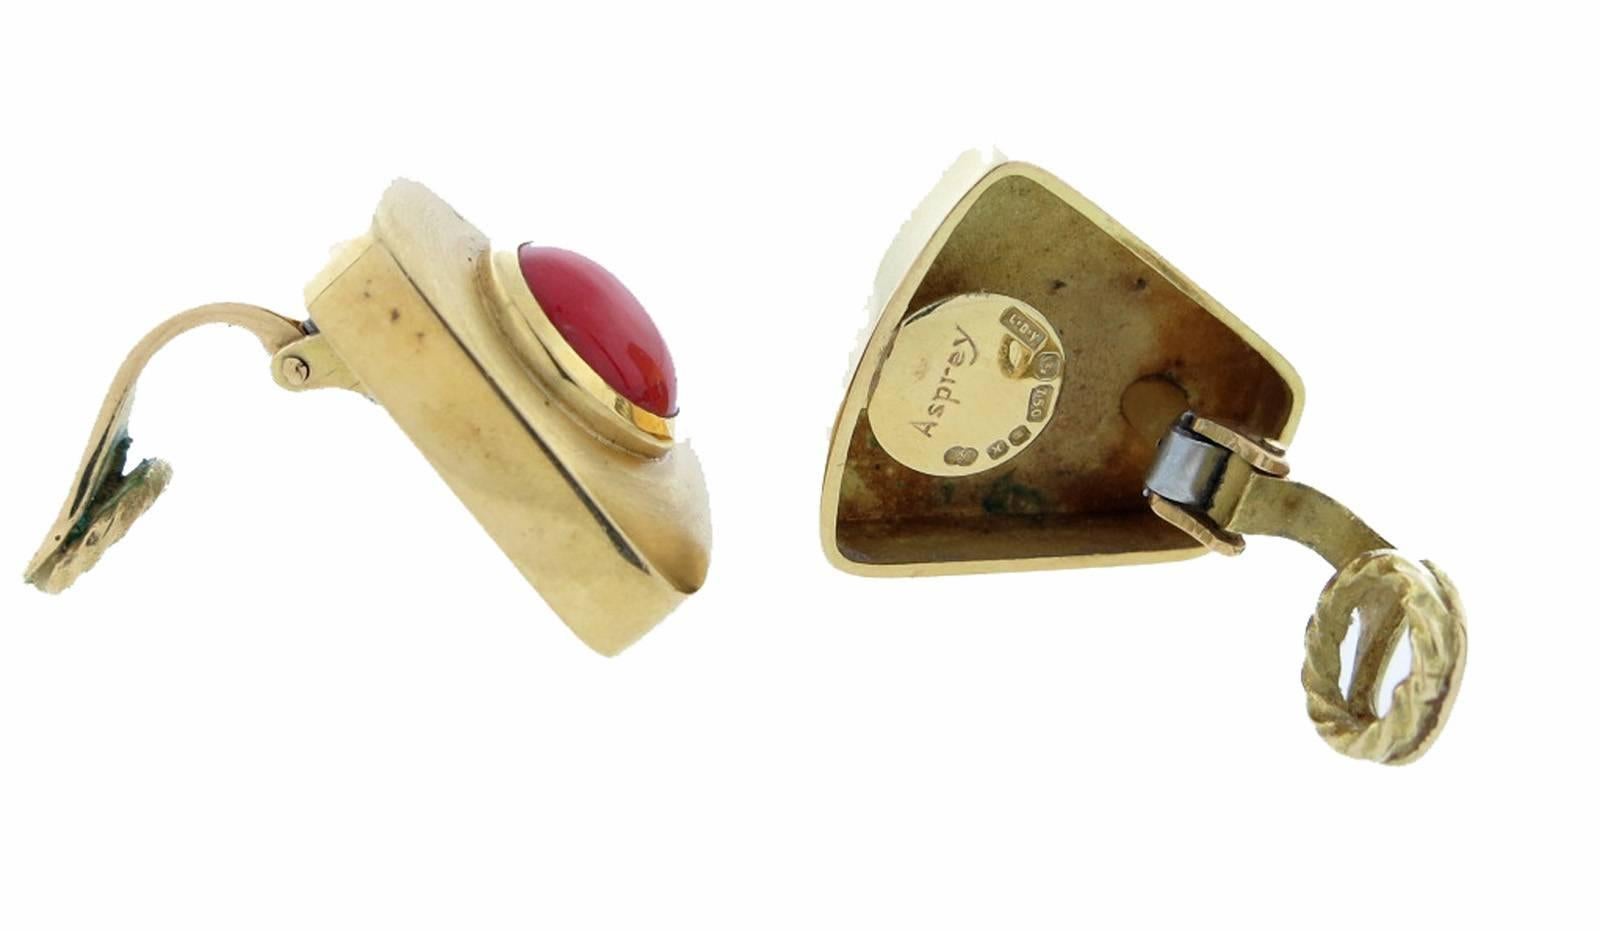 18kt. yellow gold matt finish earrings made by Asprey. The center is bezel set with a richly colored domed coral  each measuring approx 9.7 mm. Clip back , posts can be added. Hallmarked and signed. 